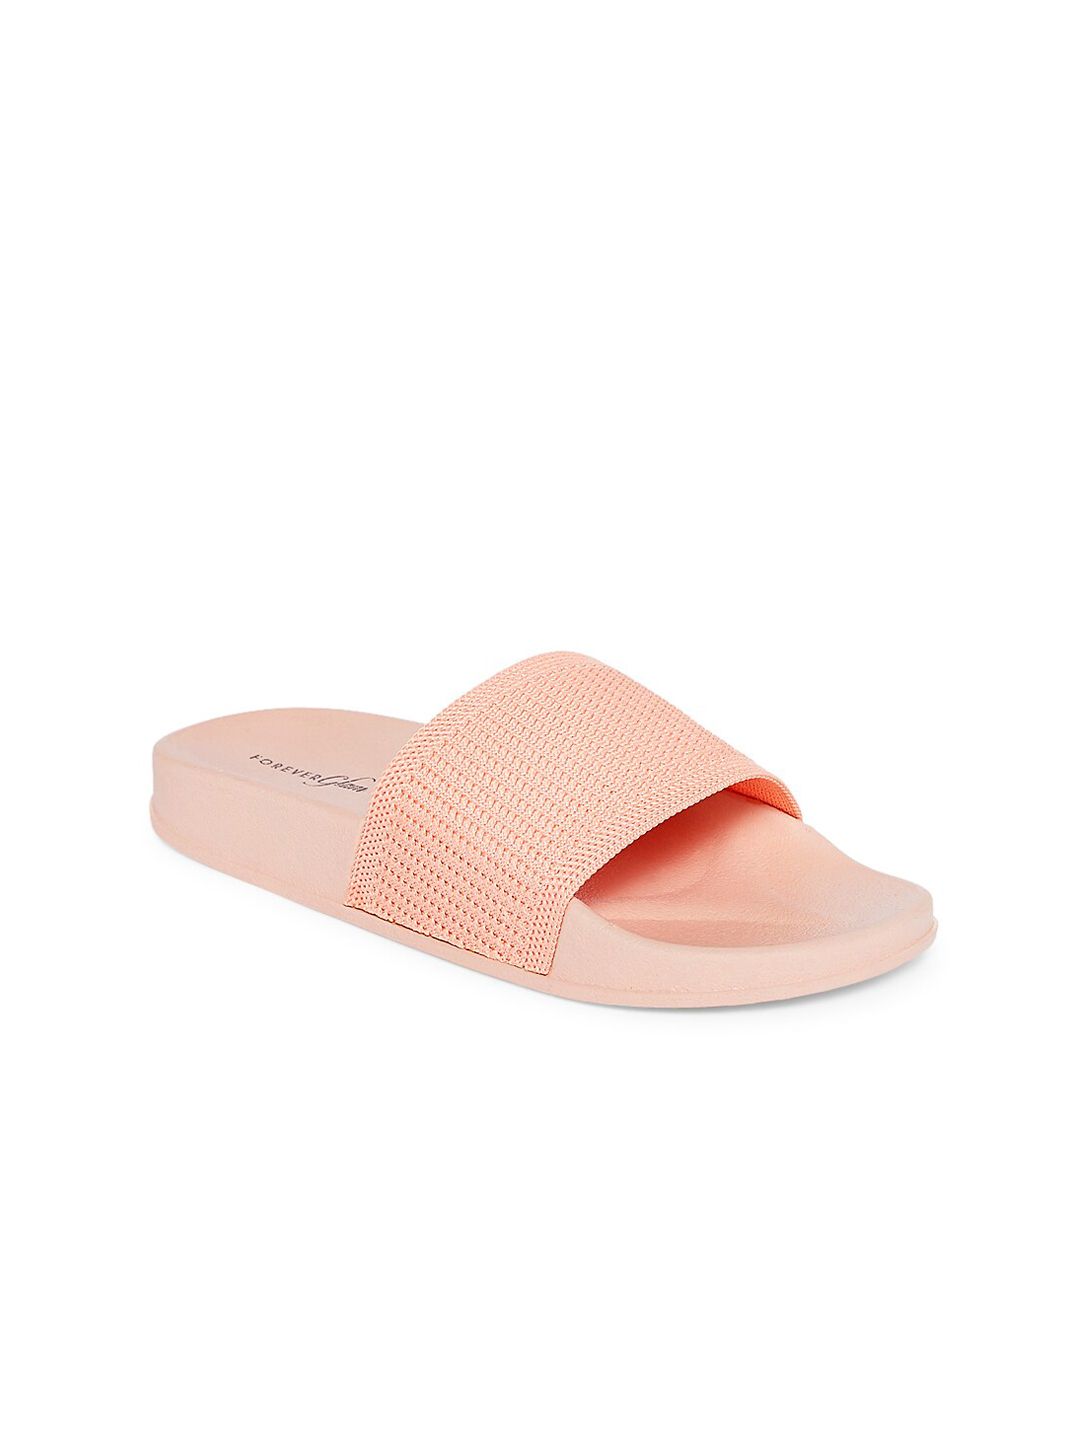 Forever Glam by Pantaloons Women Coral Woven Designed Sliders Price in India